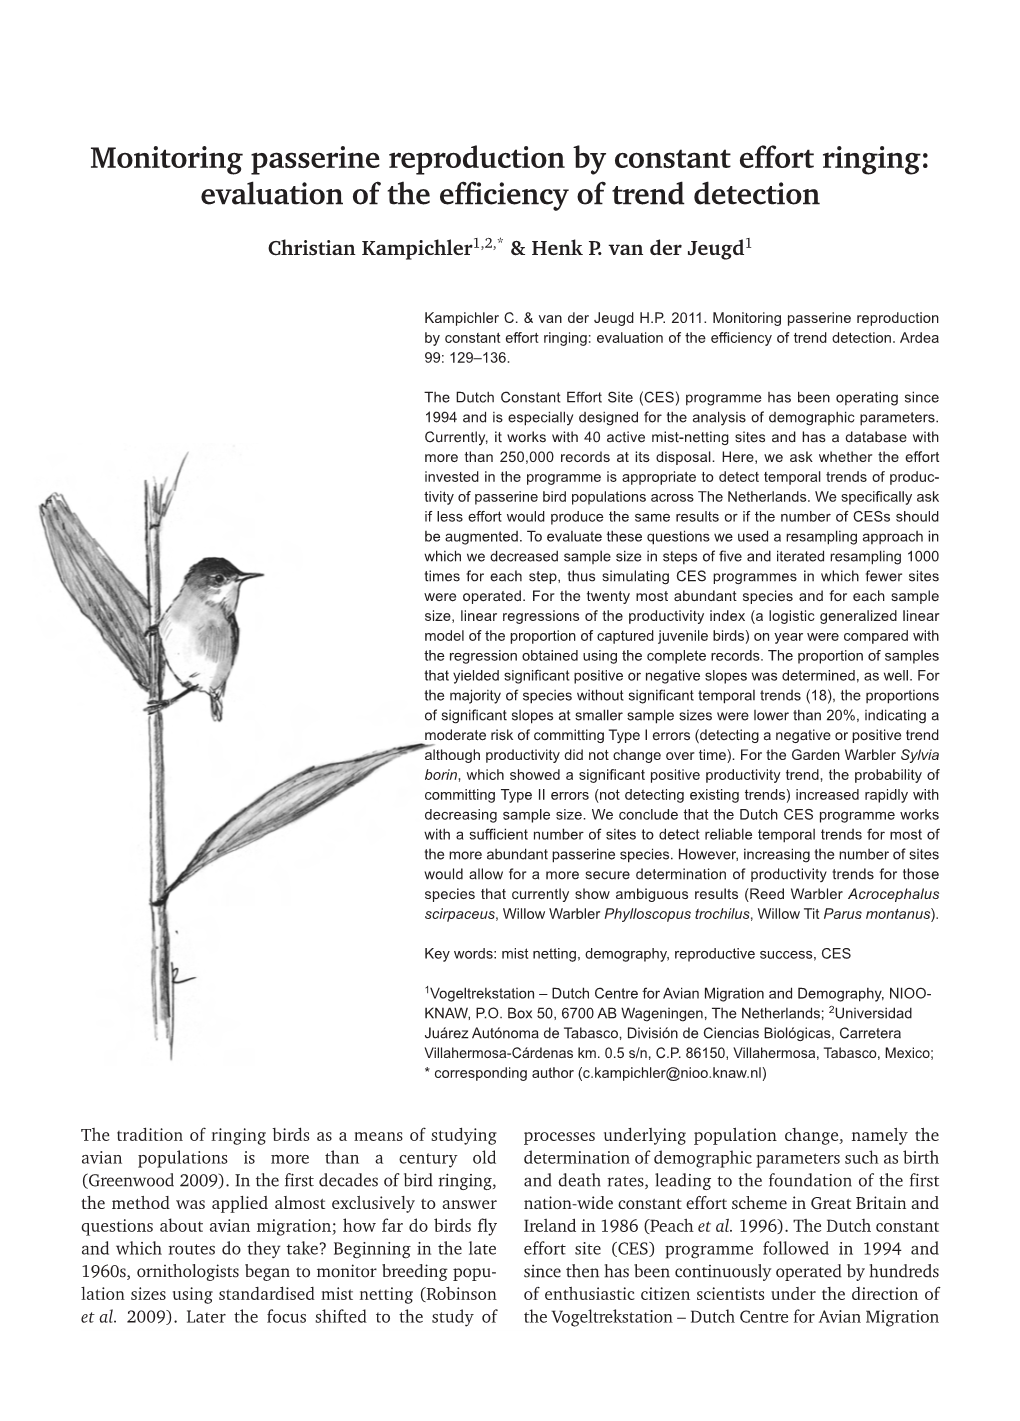 Monitoring Passerine Reproduction by Constant Effort Ringing: Evaluation of the Efficiency of Trend Detection